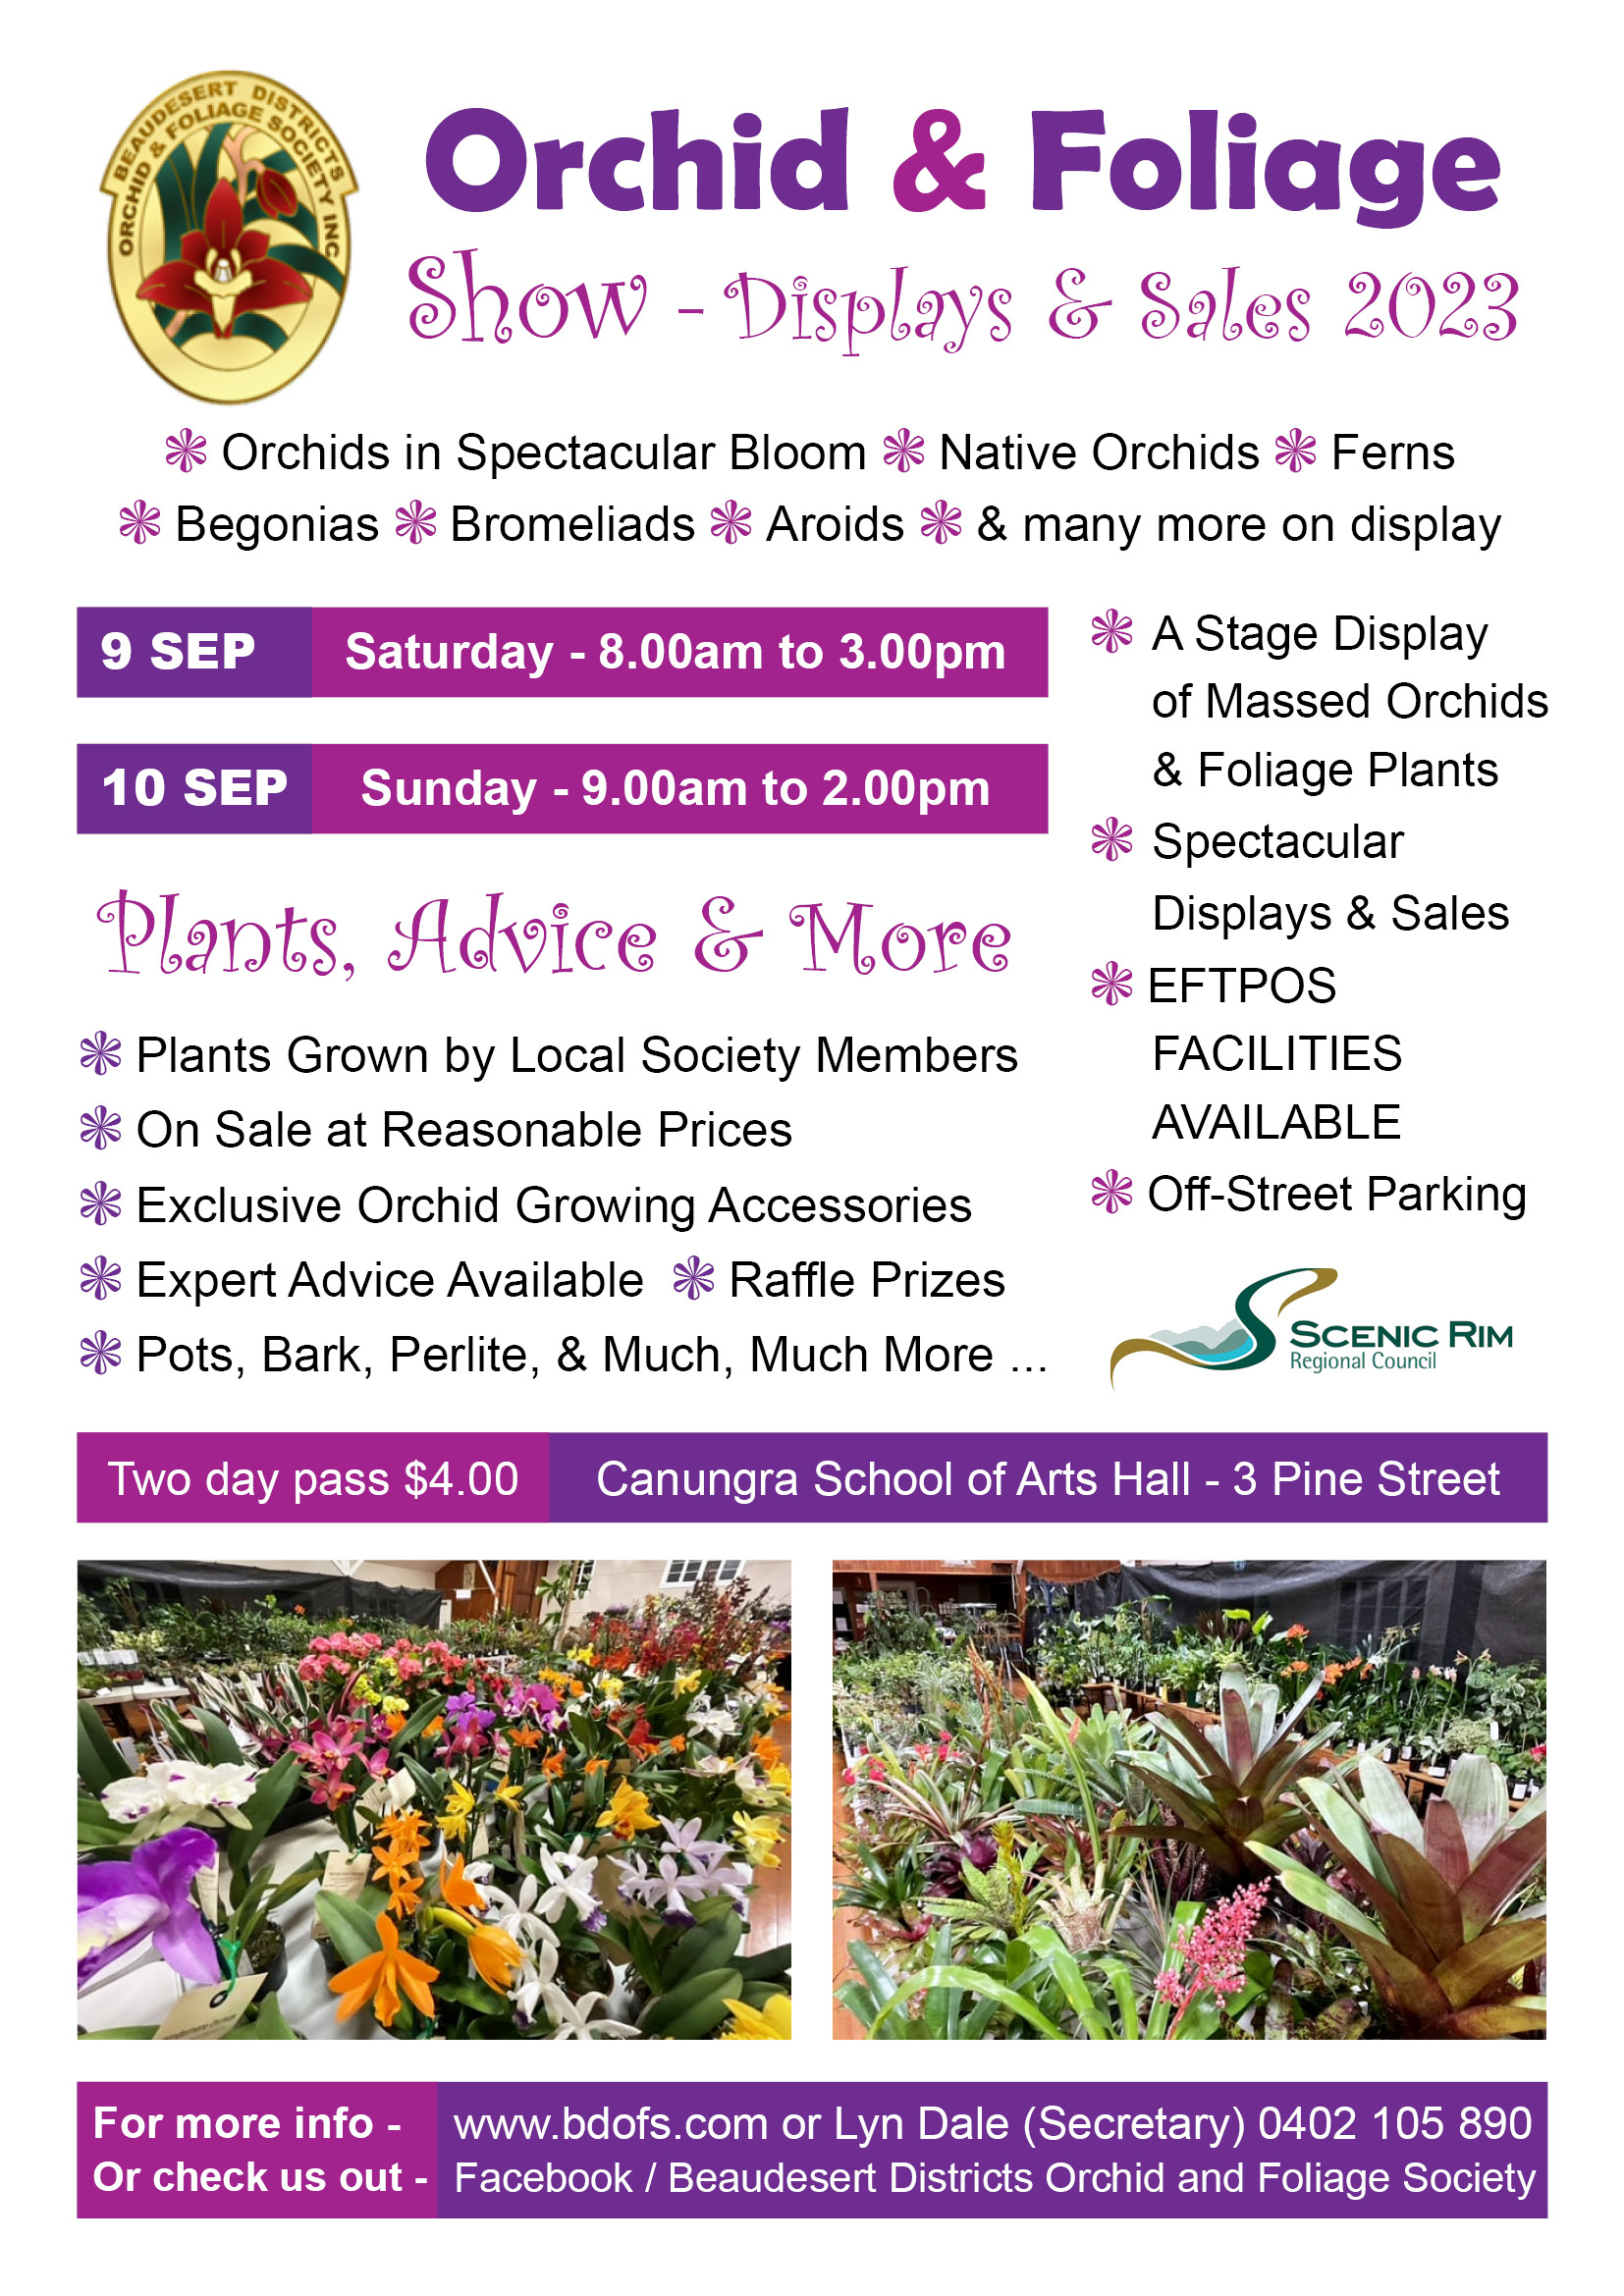 Orchid & Foliage Show